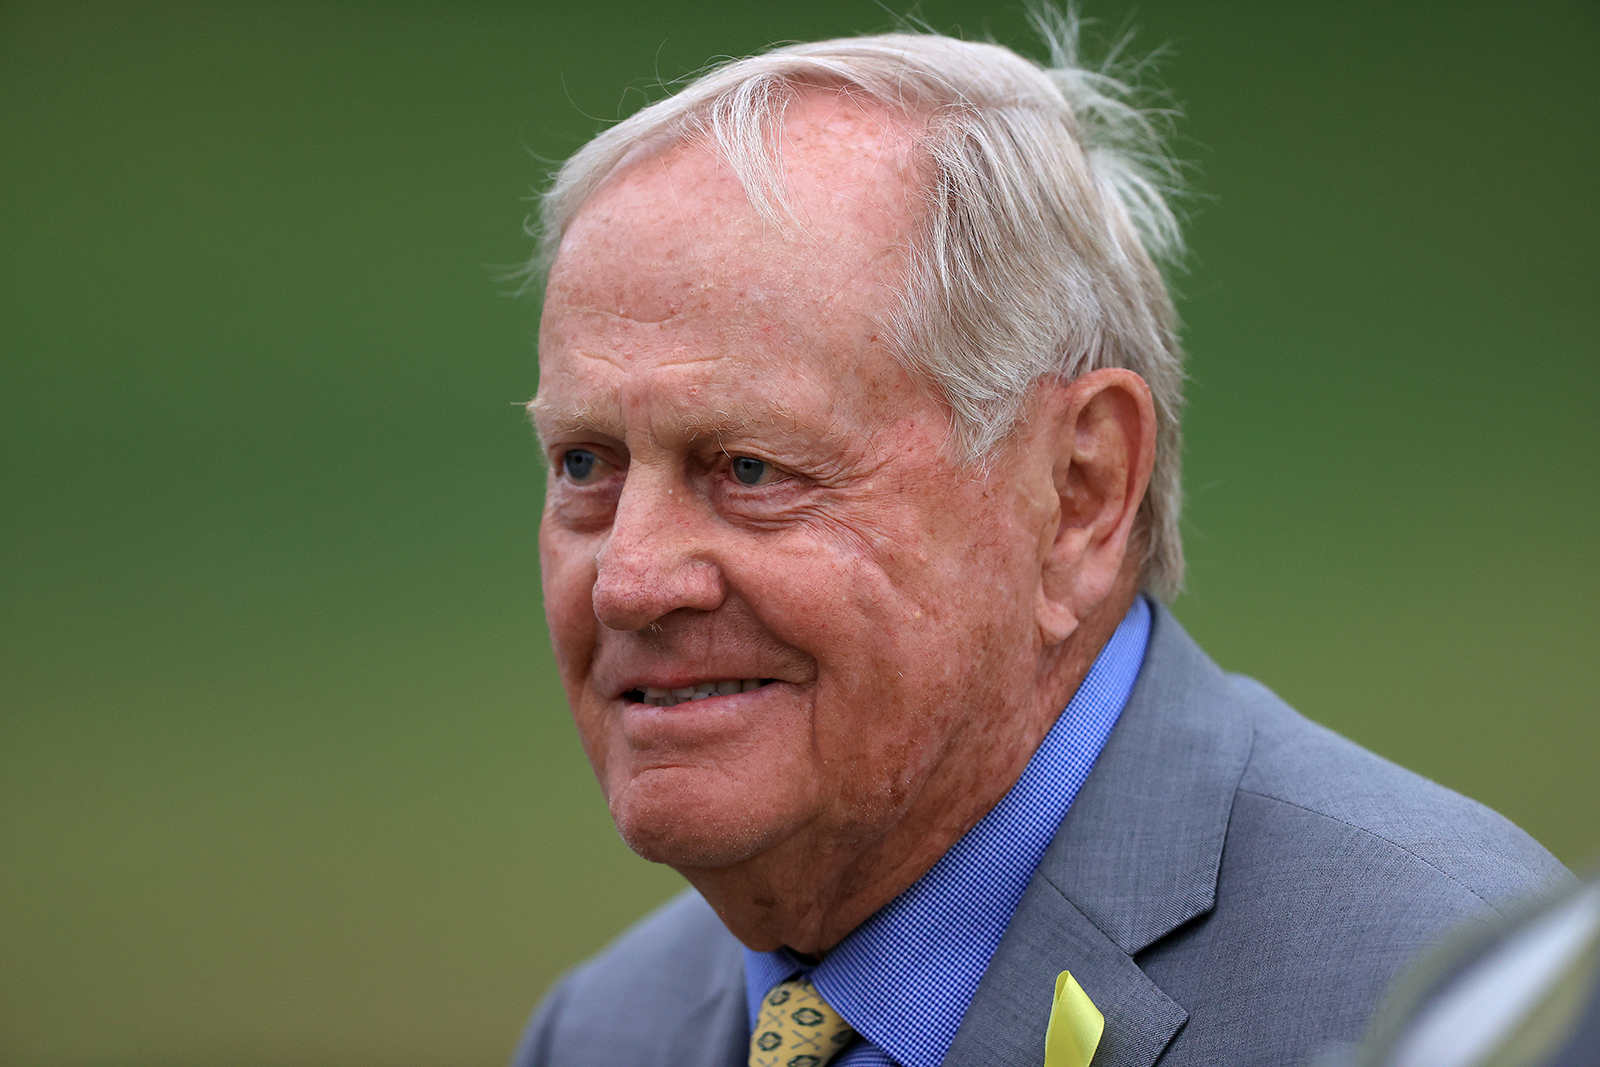 Jack Nicklaus looks on after the final round of The Memorial Tournament on July 19, at Muirfield Village Golf Club in Dublin, Ohio. 